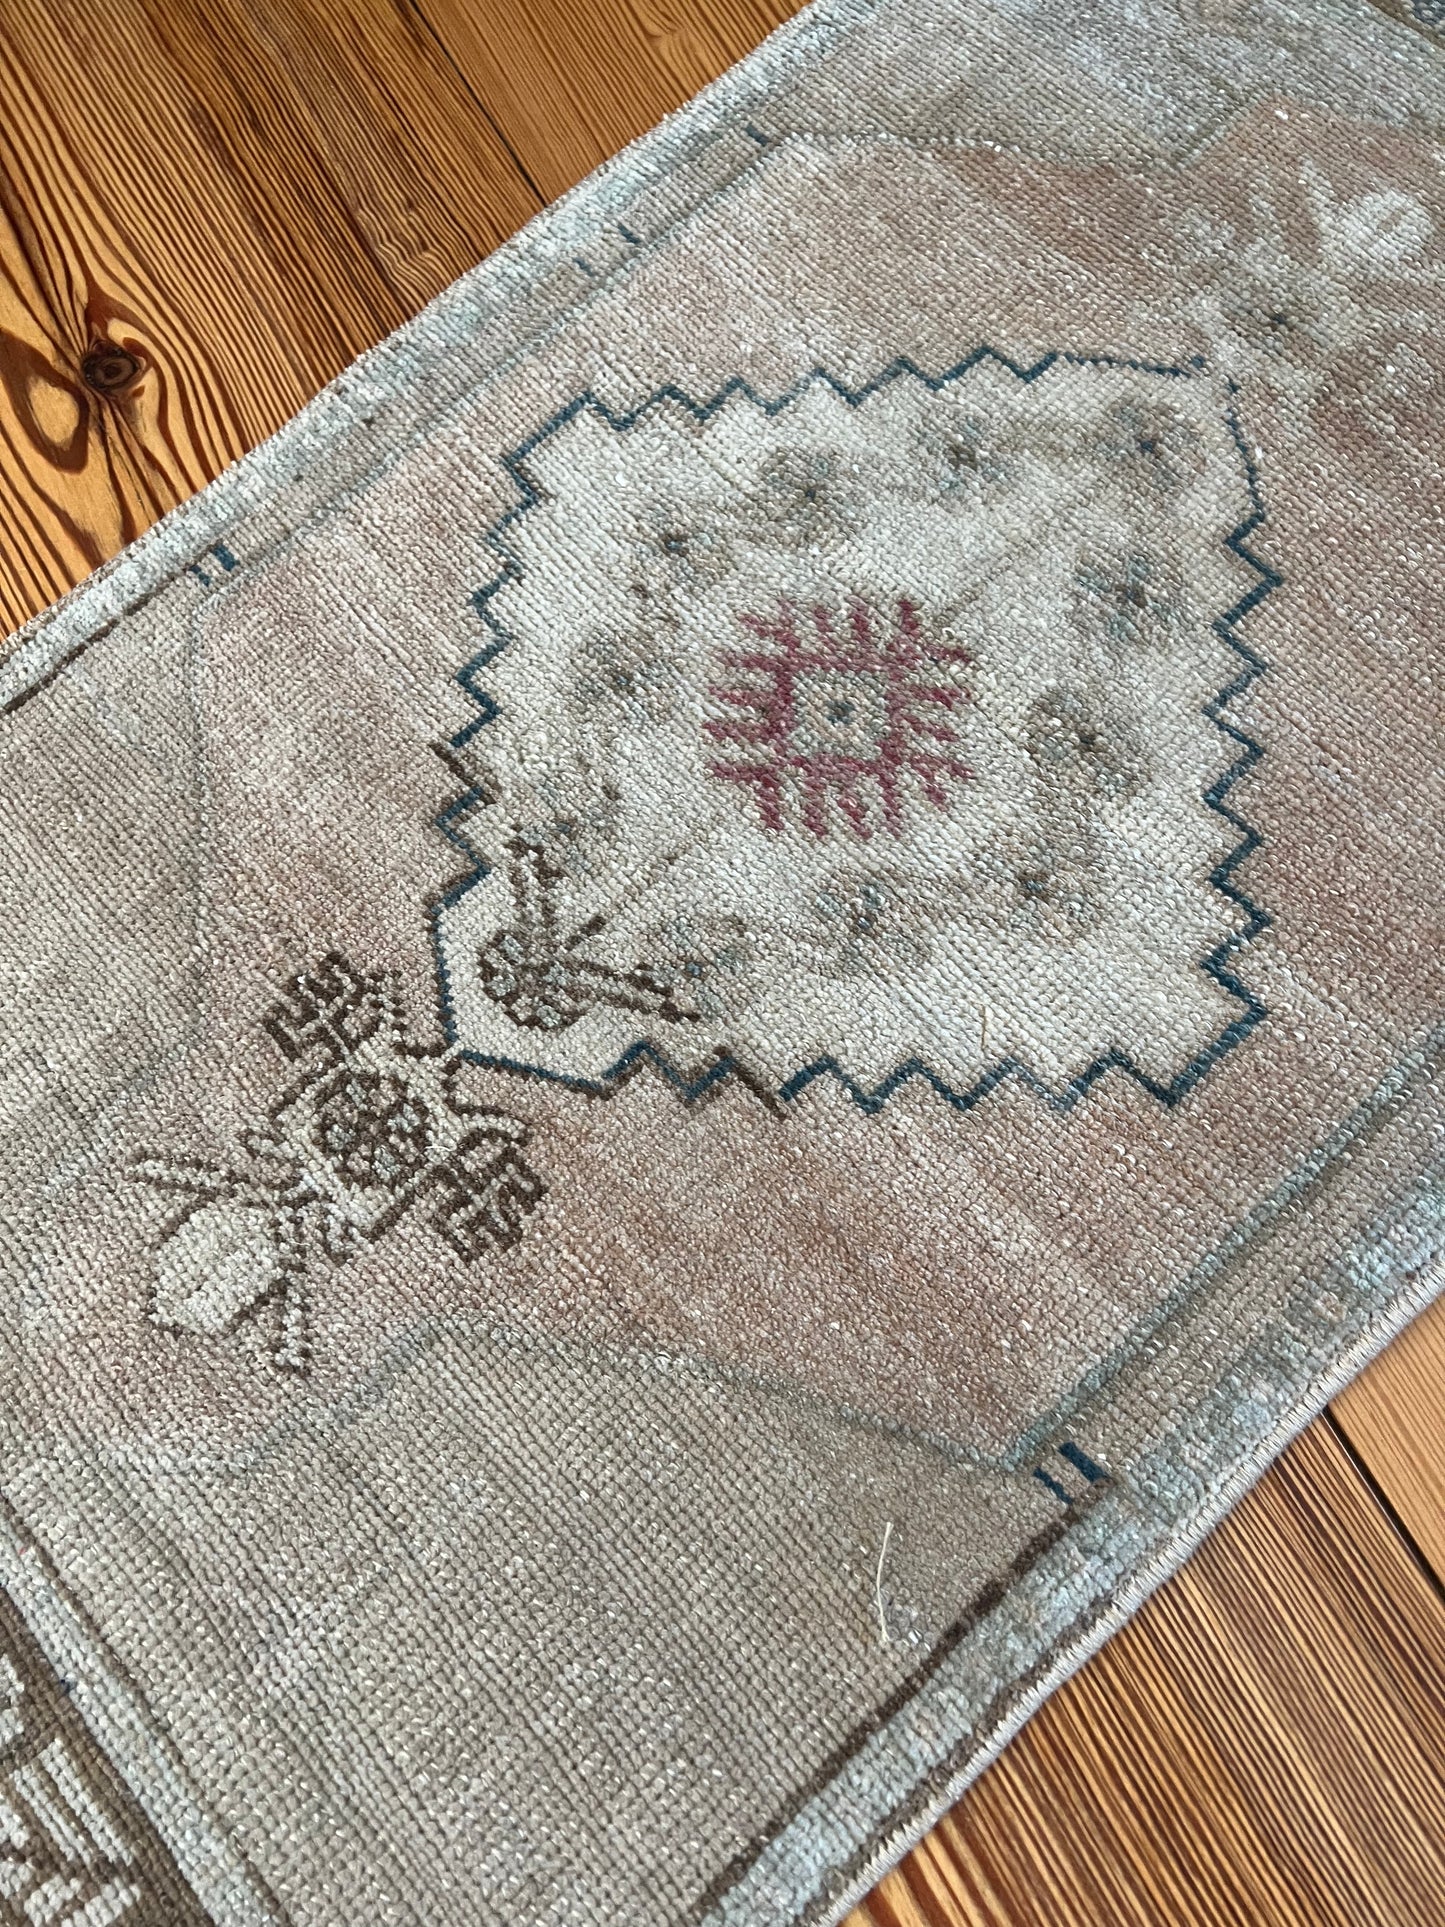 1'5" x 3'1" Small Rug with Mauve and Blue